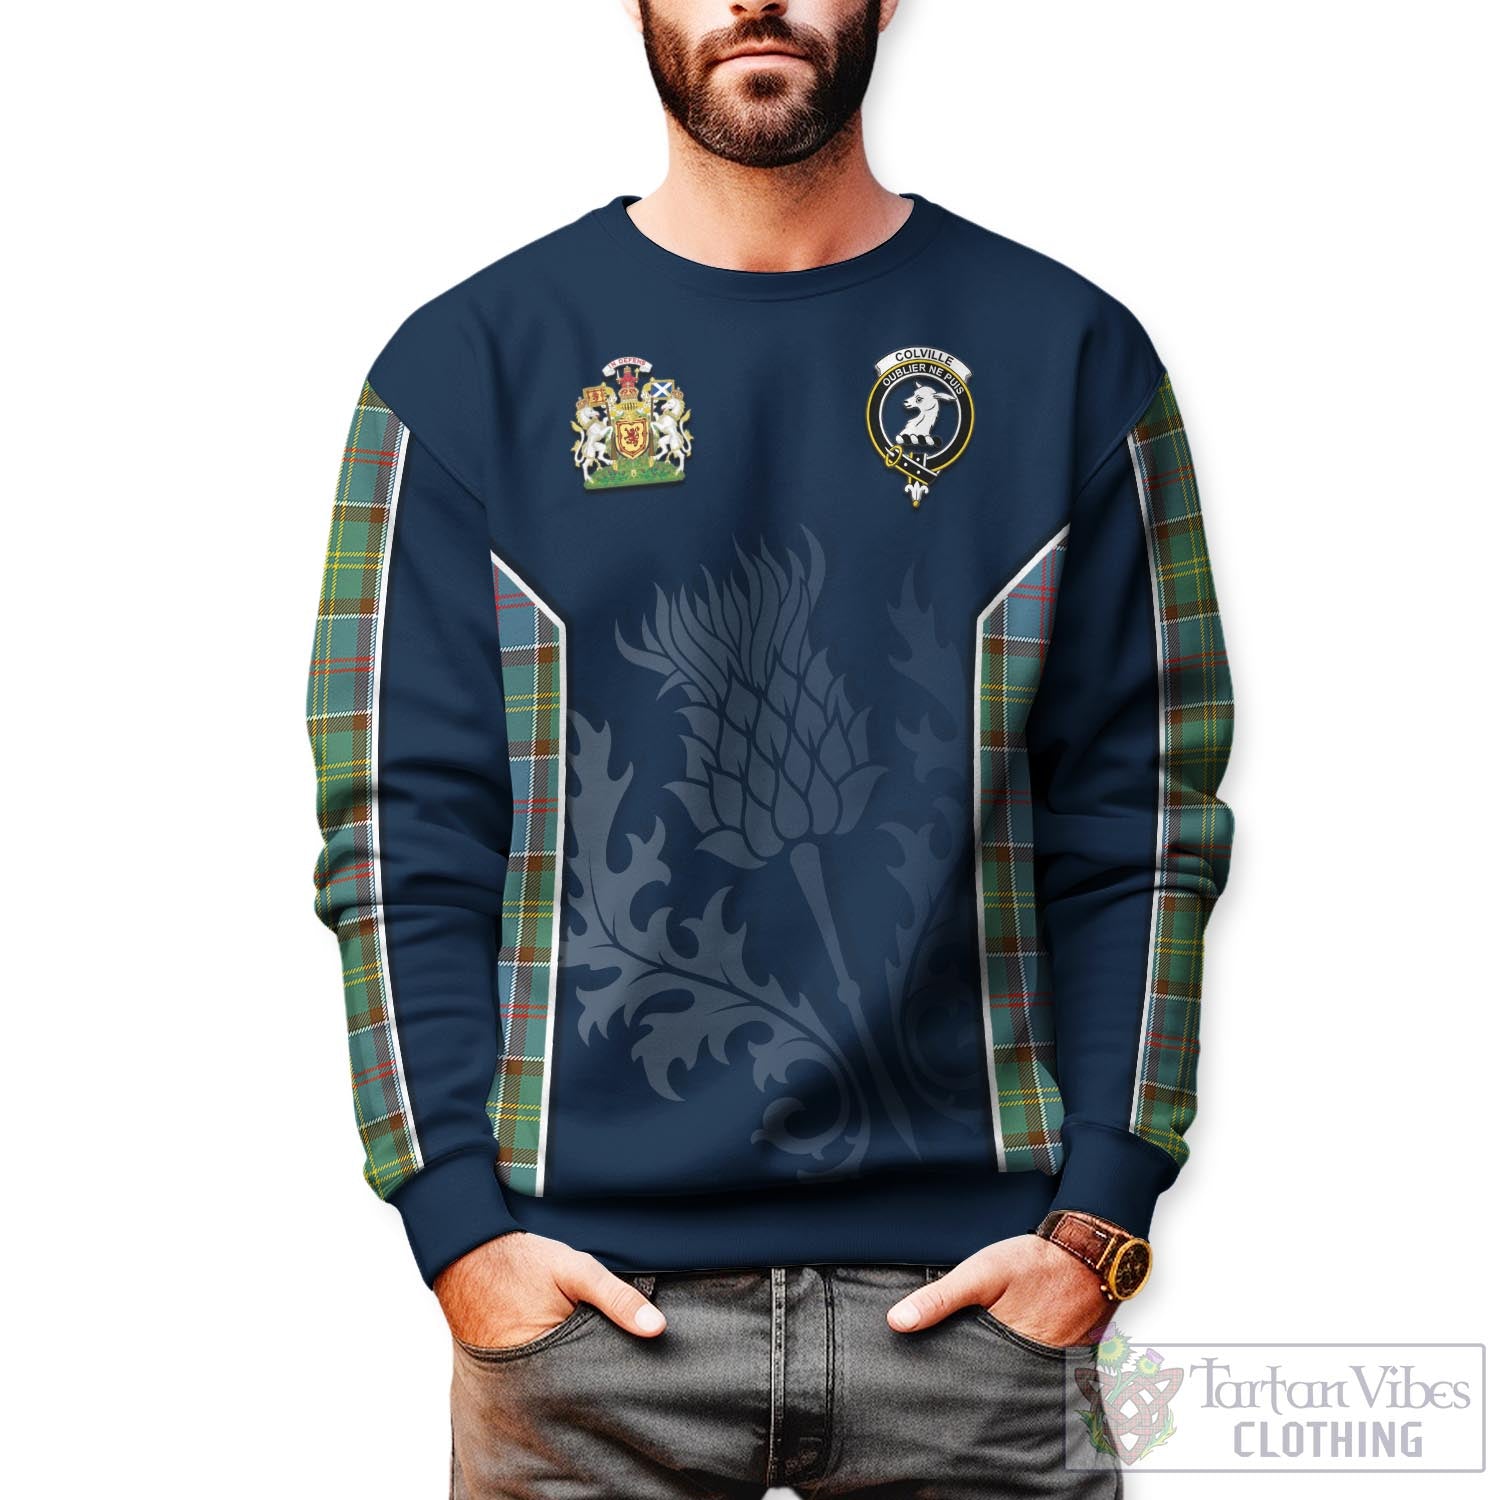 Tartan Vibes Clothing Colville Tartan Sweatshirt with Family Crest and Scottish Thistle Vibes Sport Style